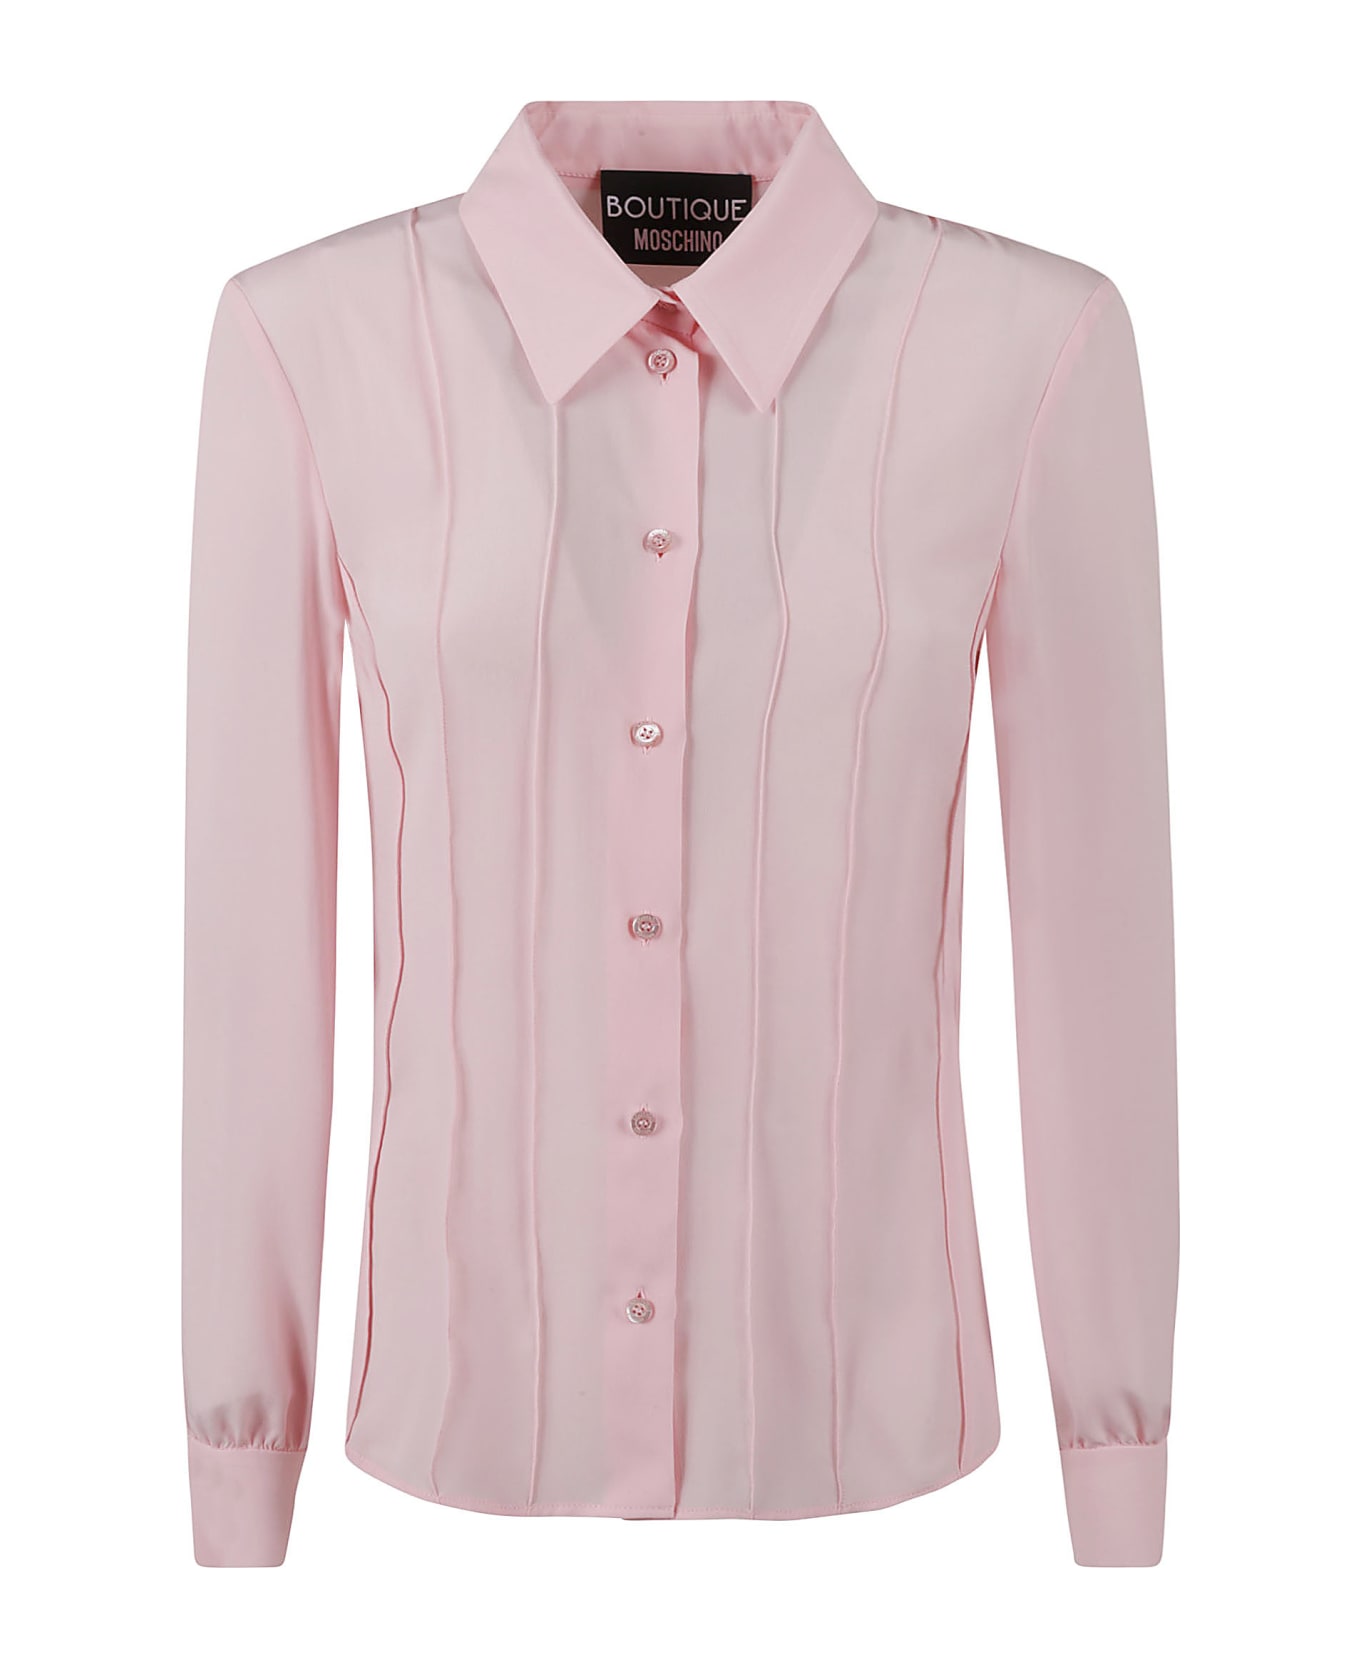 Boutique Moschino Pleated Shirt - Pink